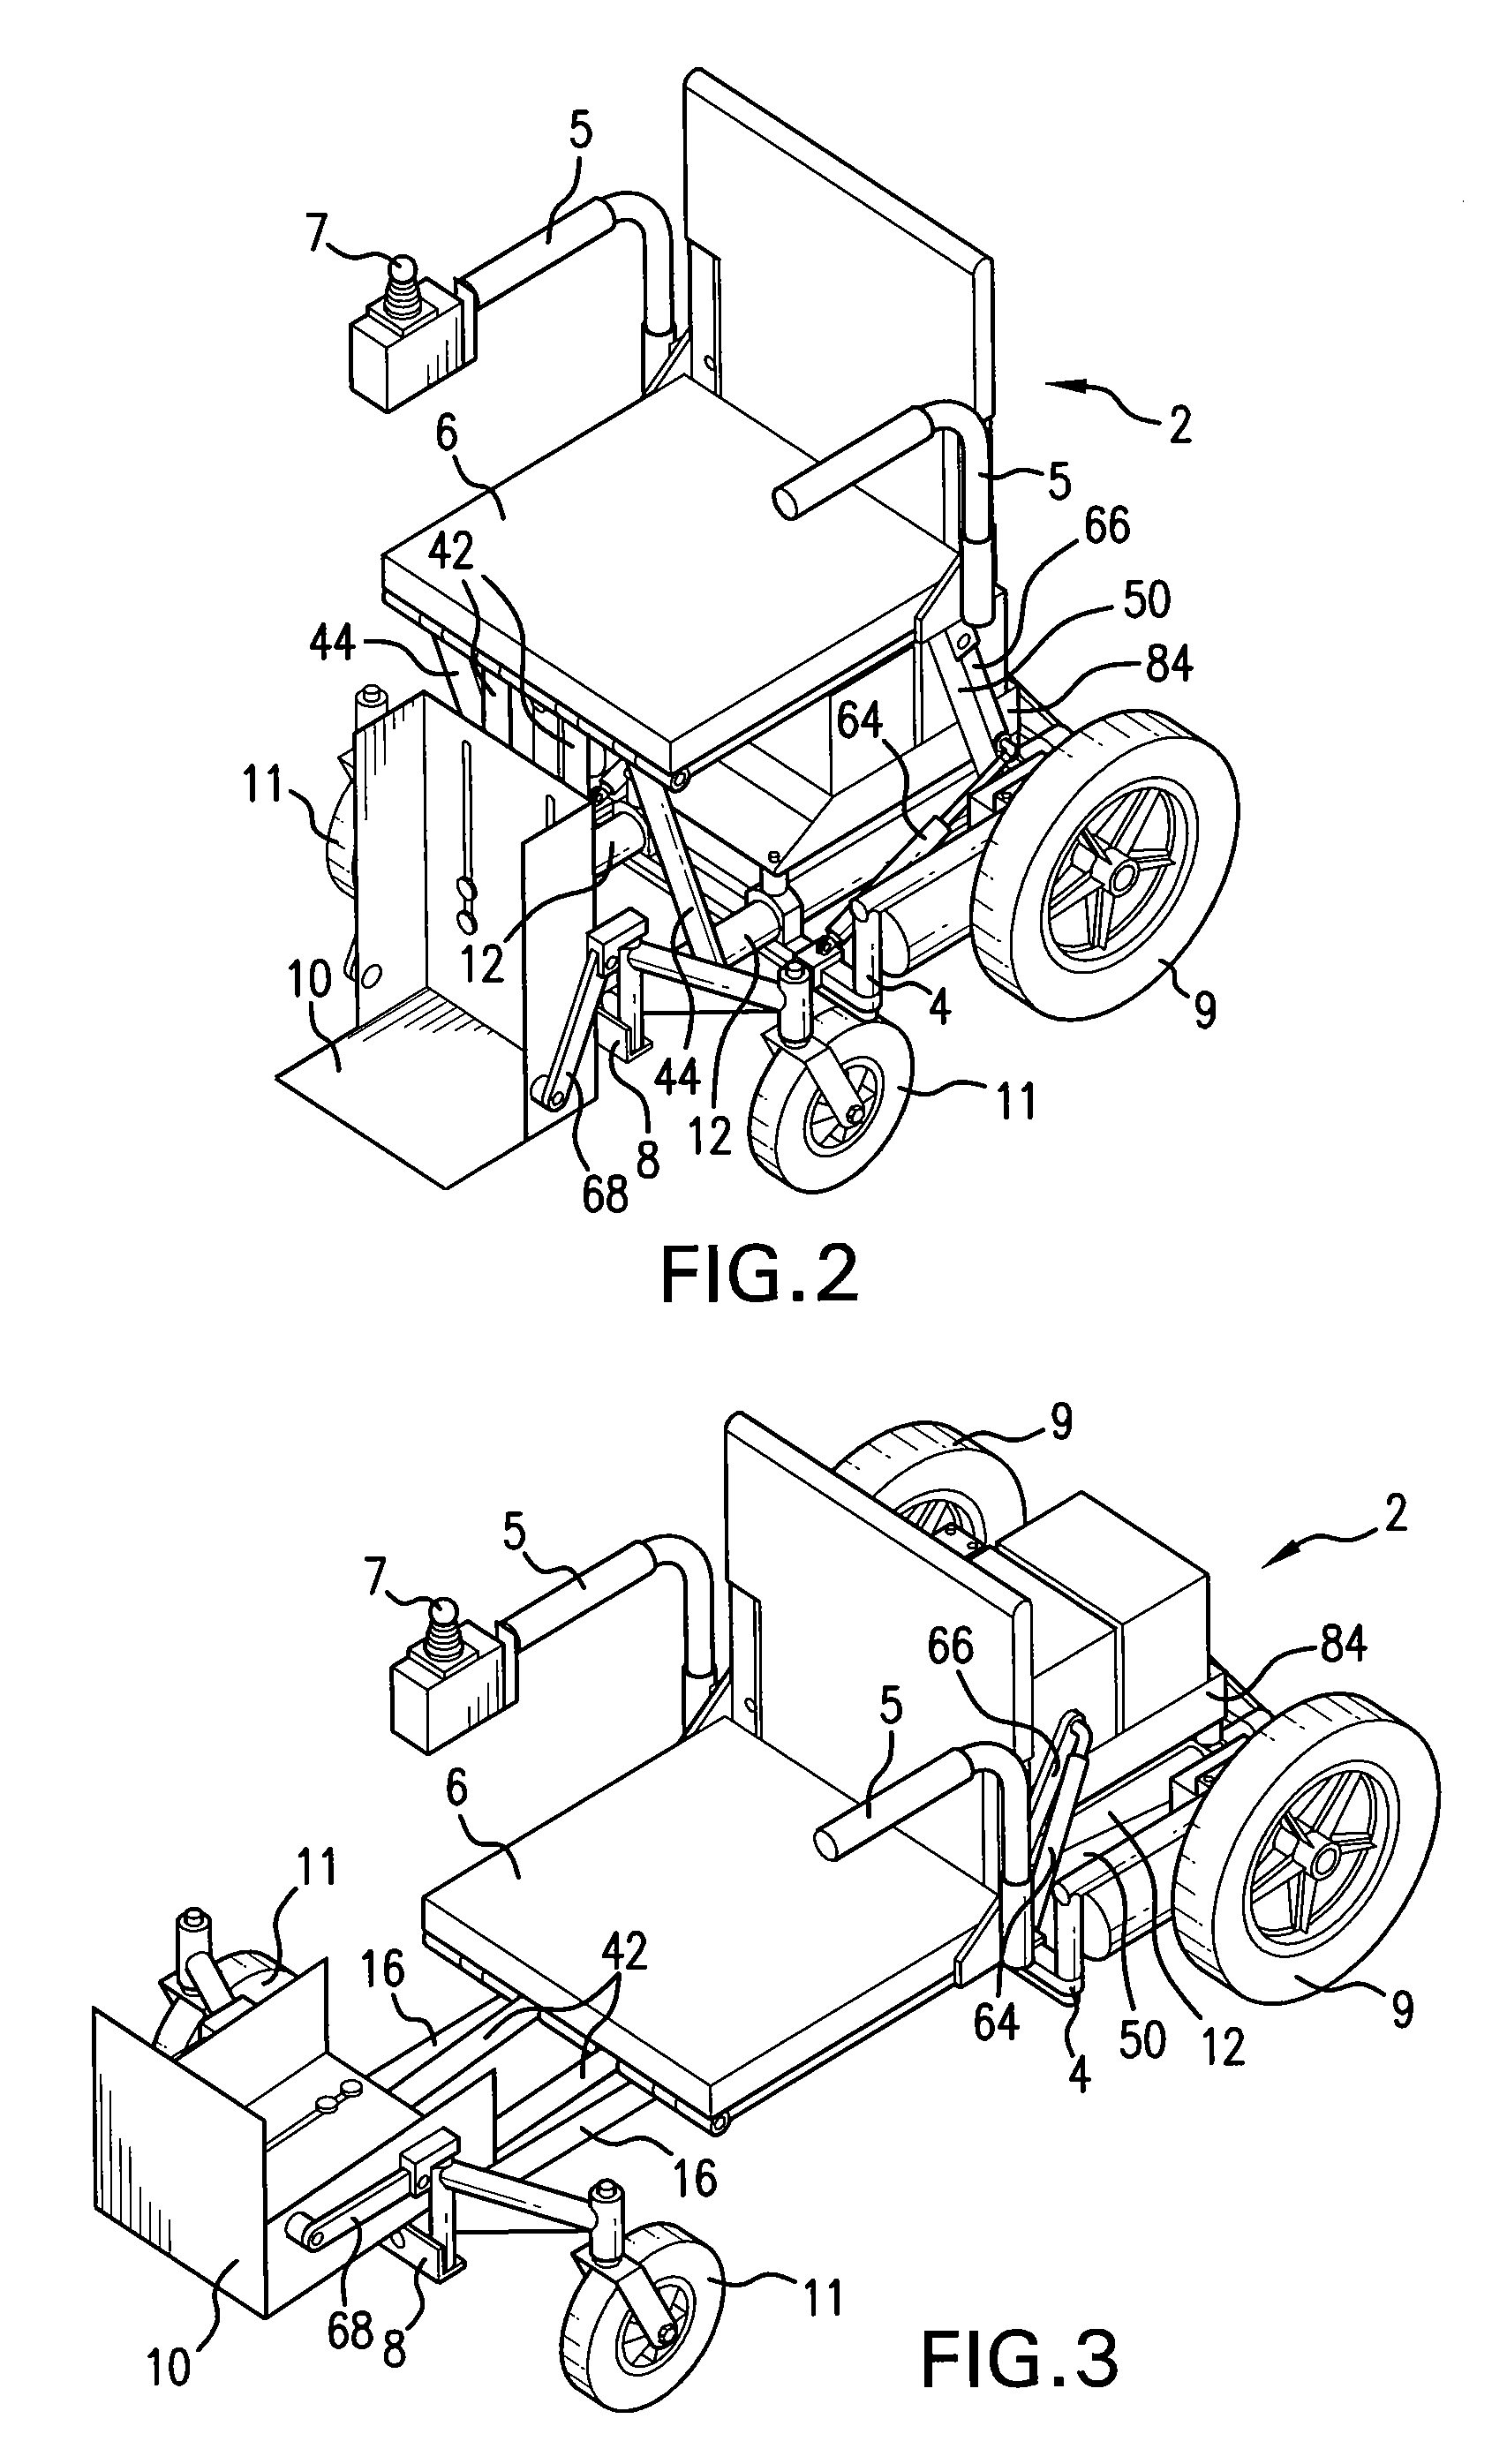 Stabilized mobile unit or wheelchair